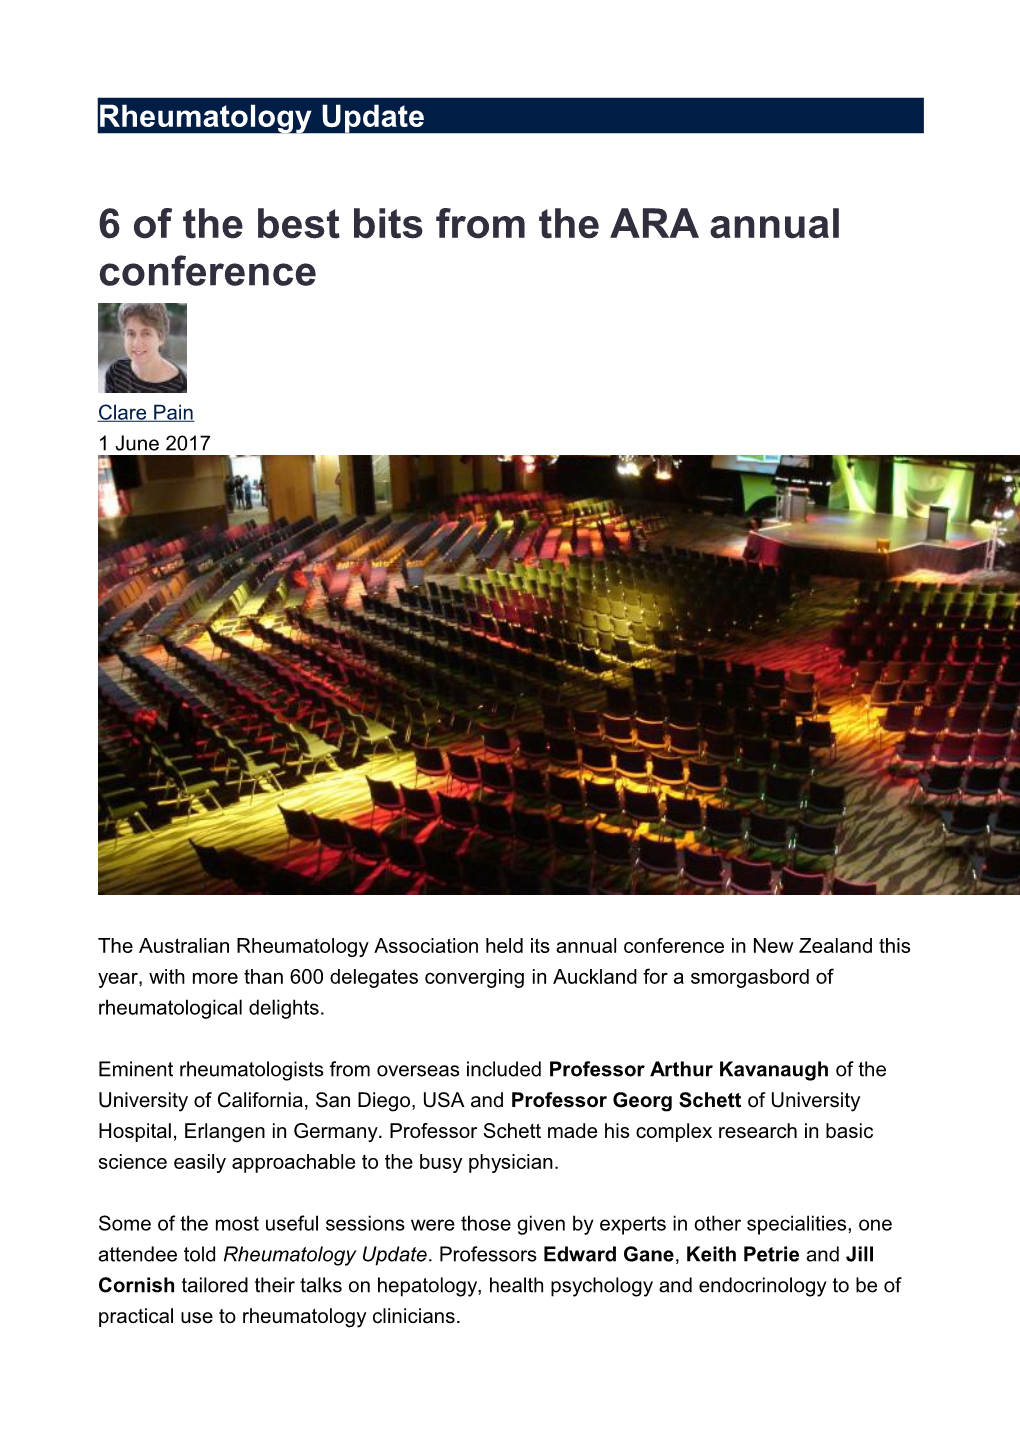 6 of the Best Bits from the ARA Annual Conference